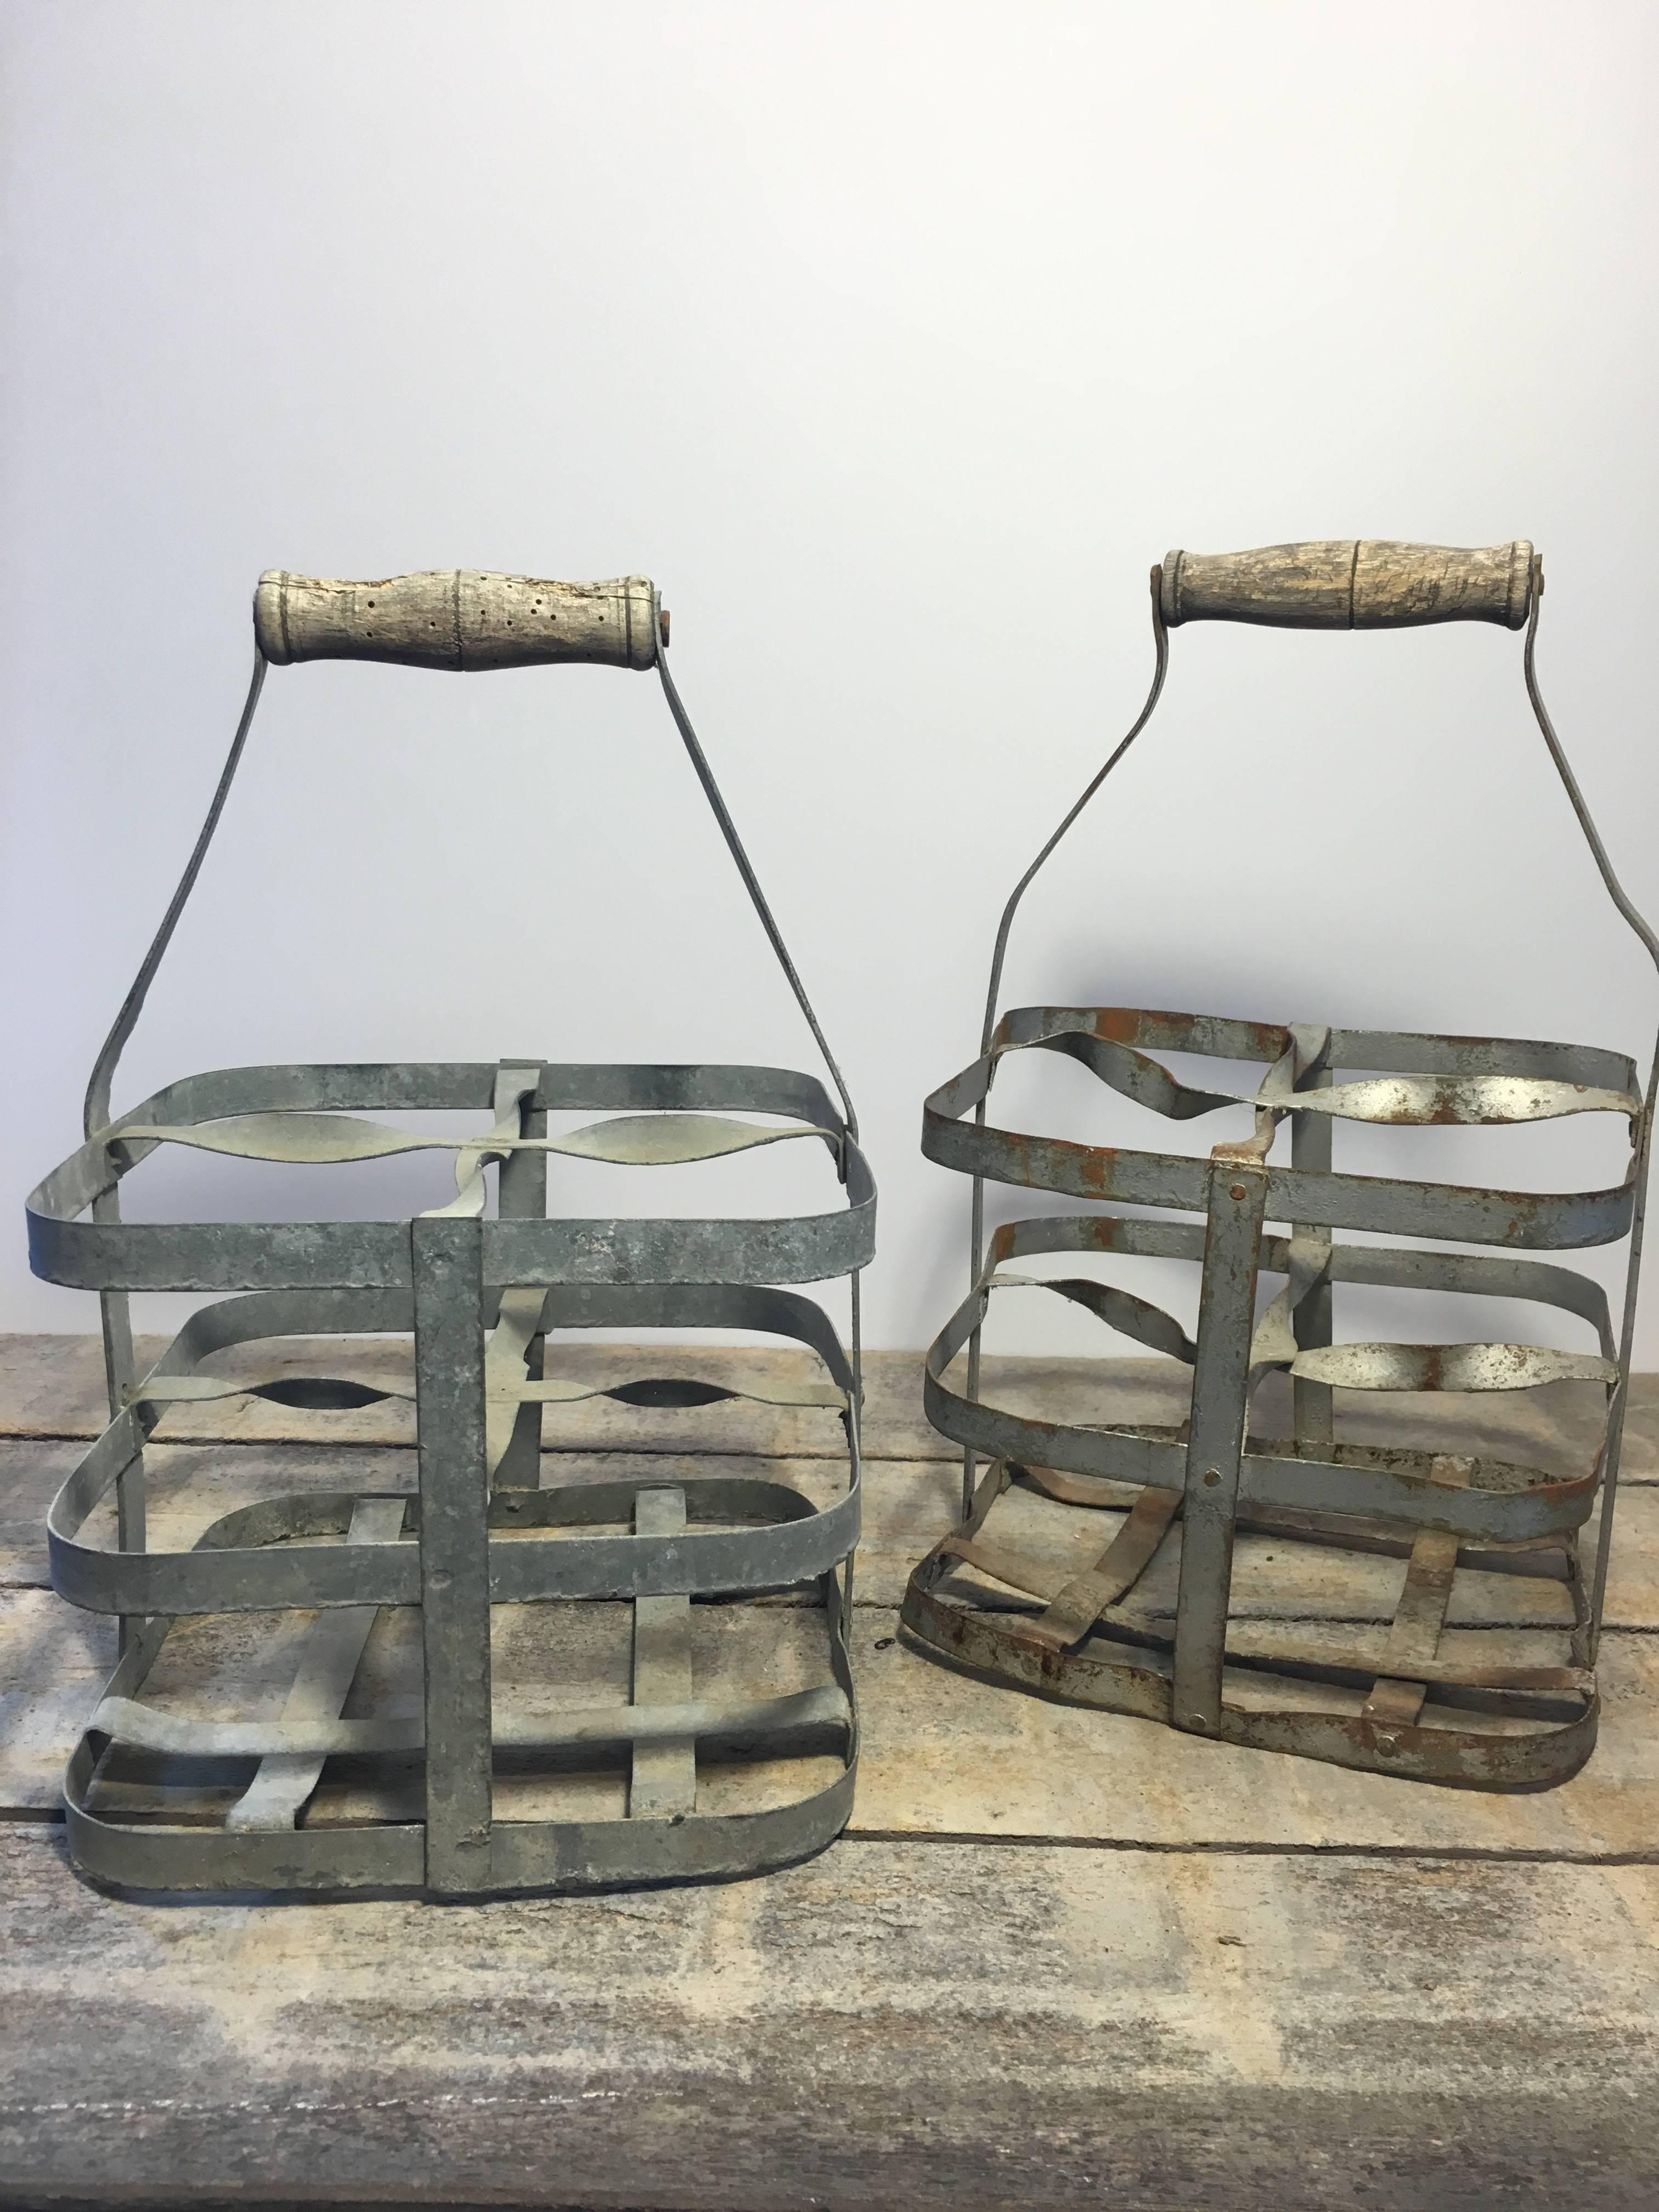 Early 20th Century Vintage French Four-Bottle Wine Carrier Baskets For Sale 3